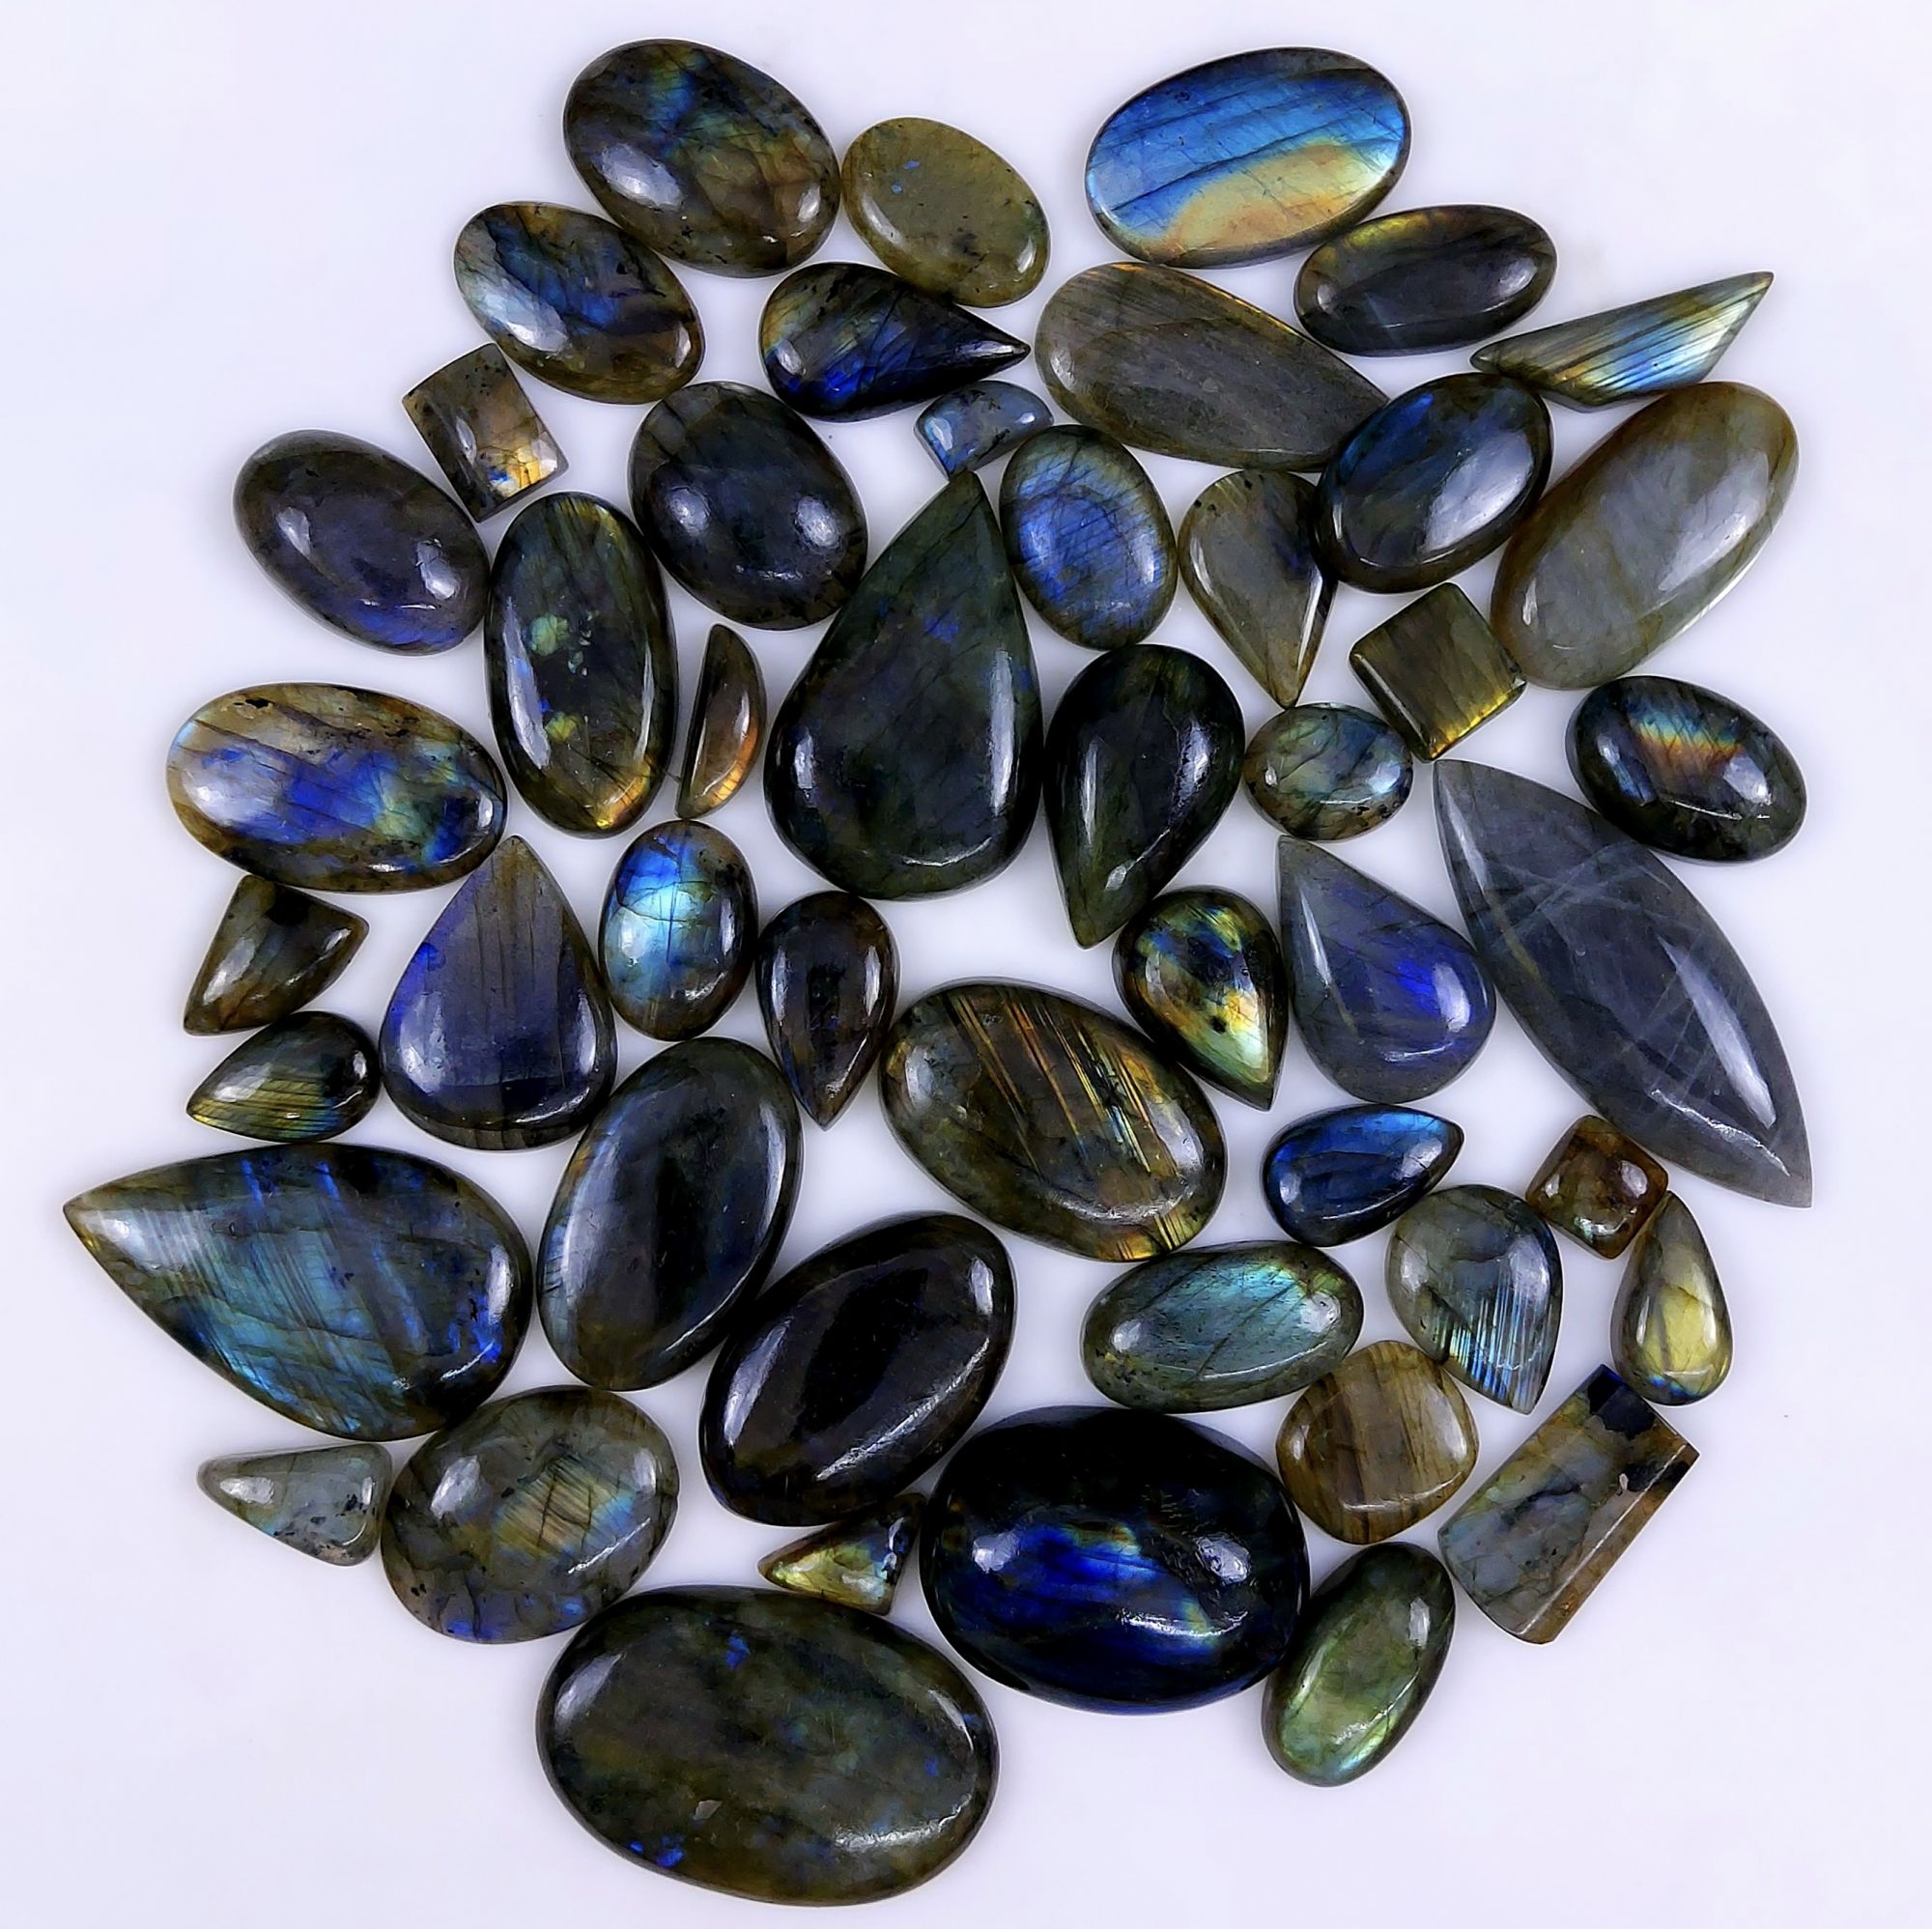 48pc 1738Cts Labradorite Cabochon Multifire Healing Crystal For Jewelry Supplies, Labradorite Necklace Handmade Wire Wrapped Gemstone Pendant 60x24 14x9mm#6282